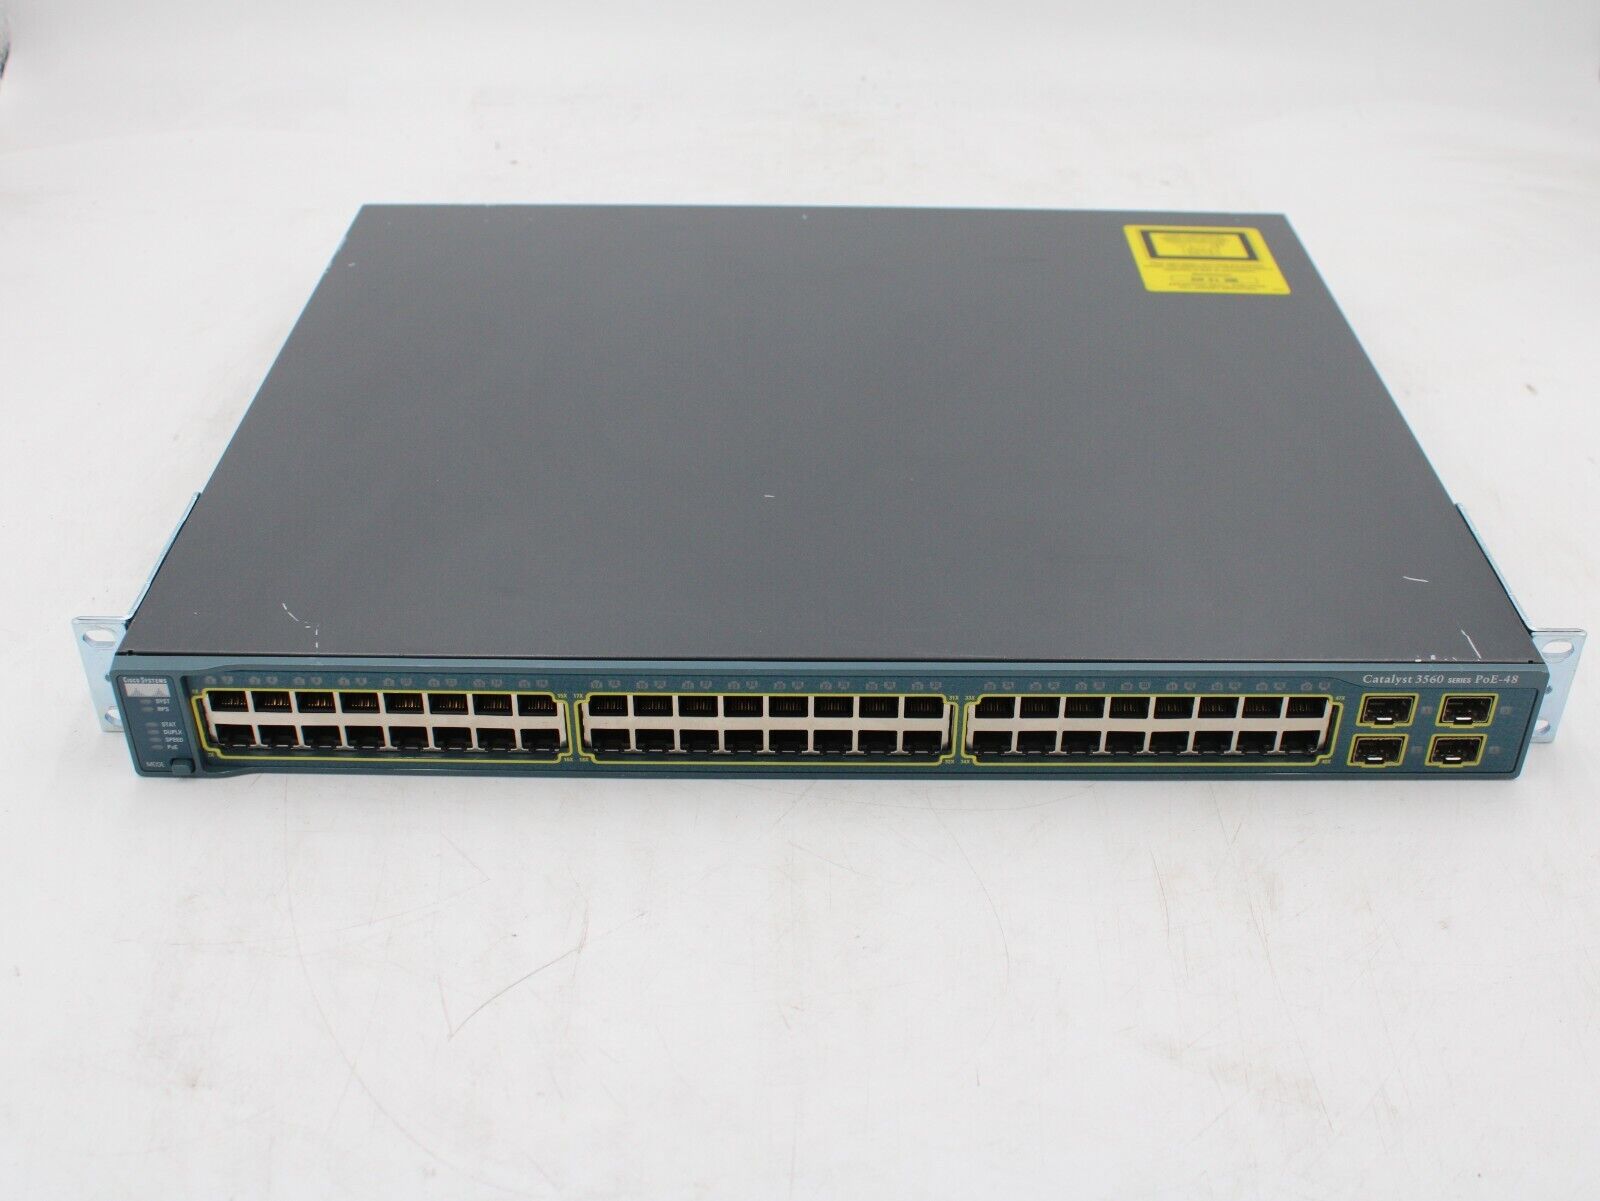 Cisco Catalyst WS-C3560-48PS-S 48-Port 10/100 Ethernet Network Switch TESTED